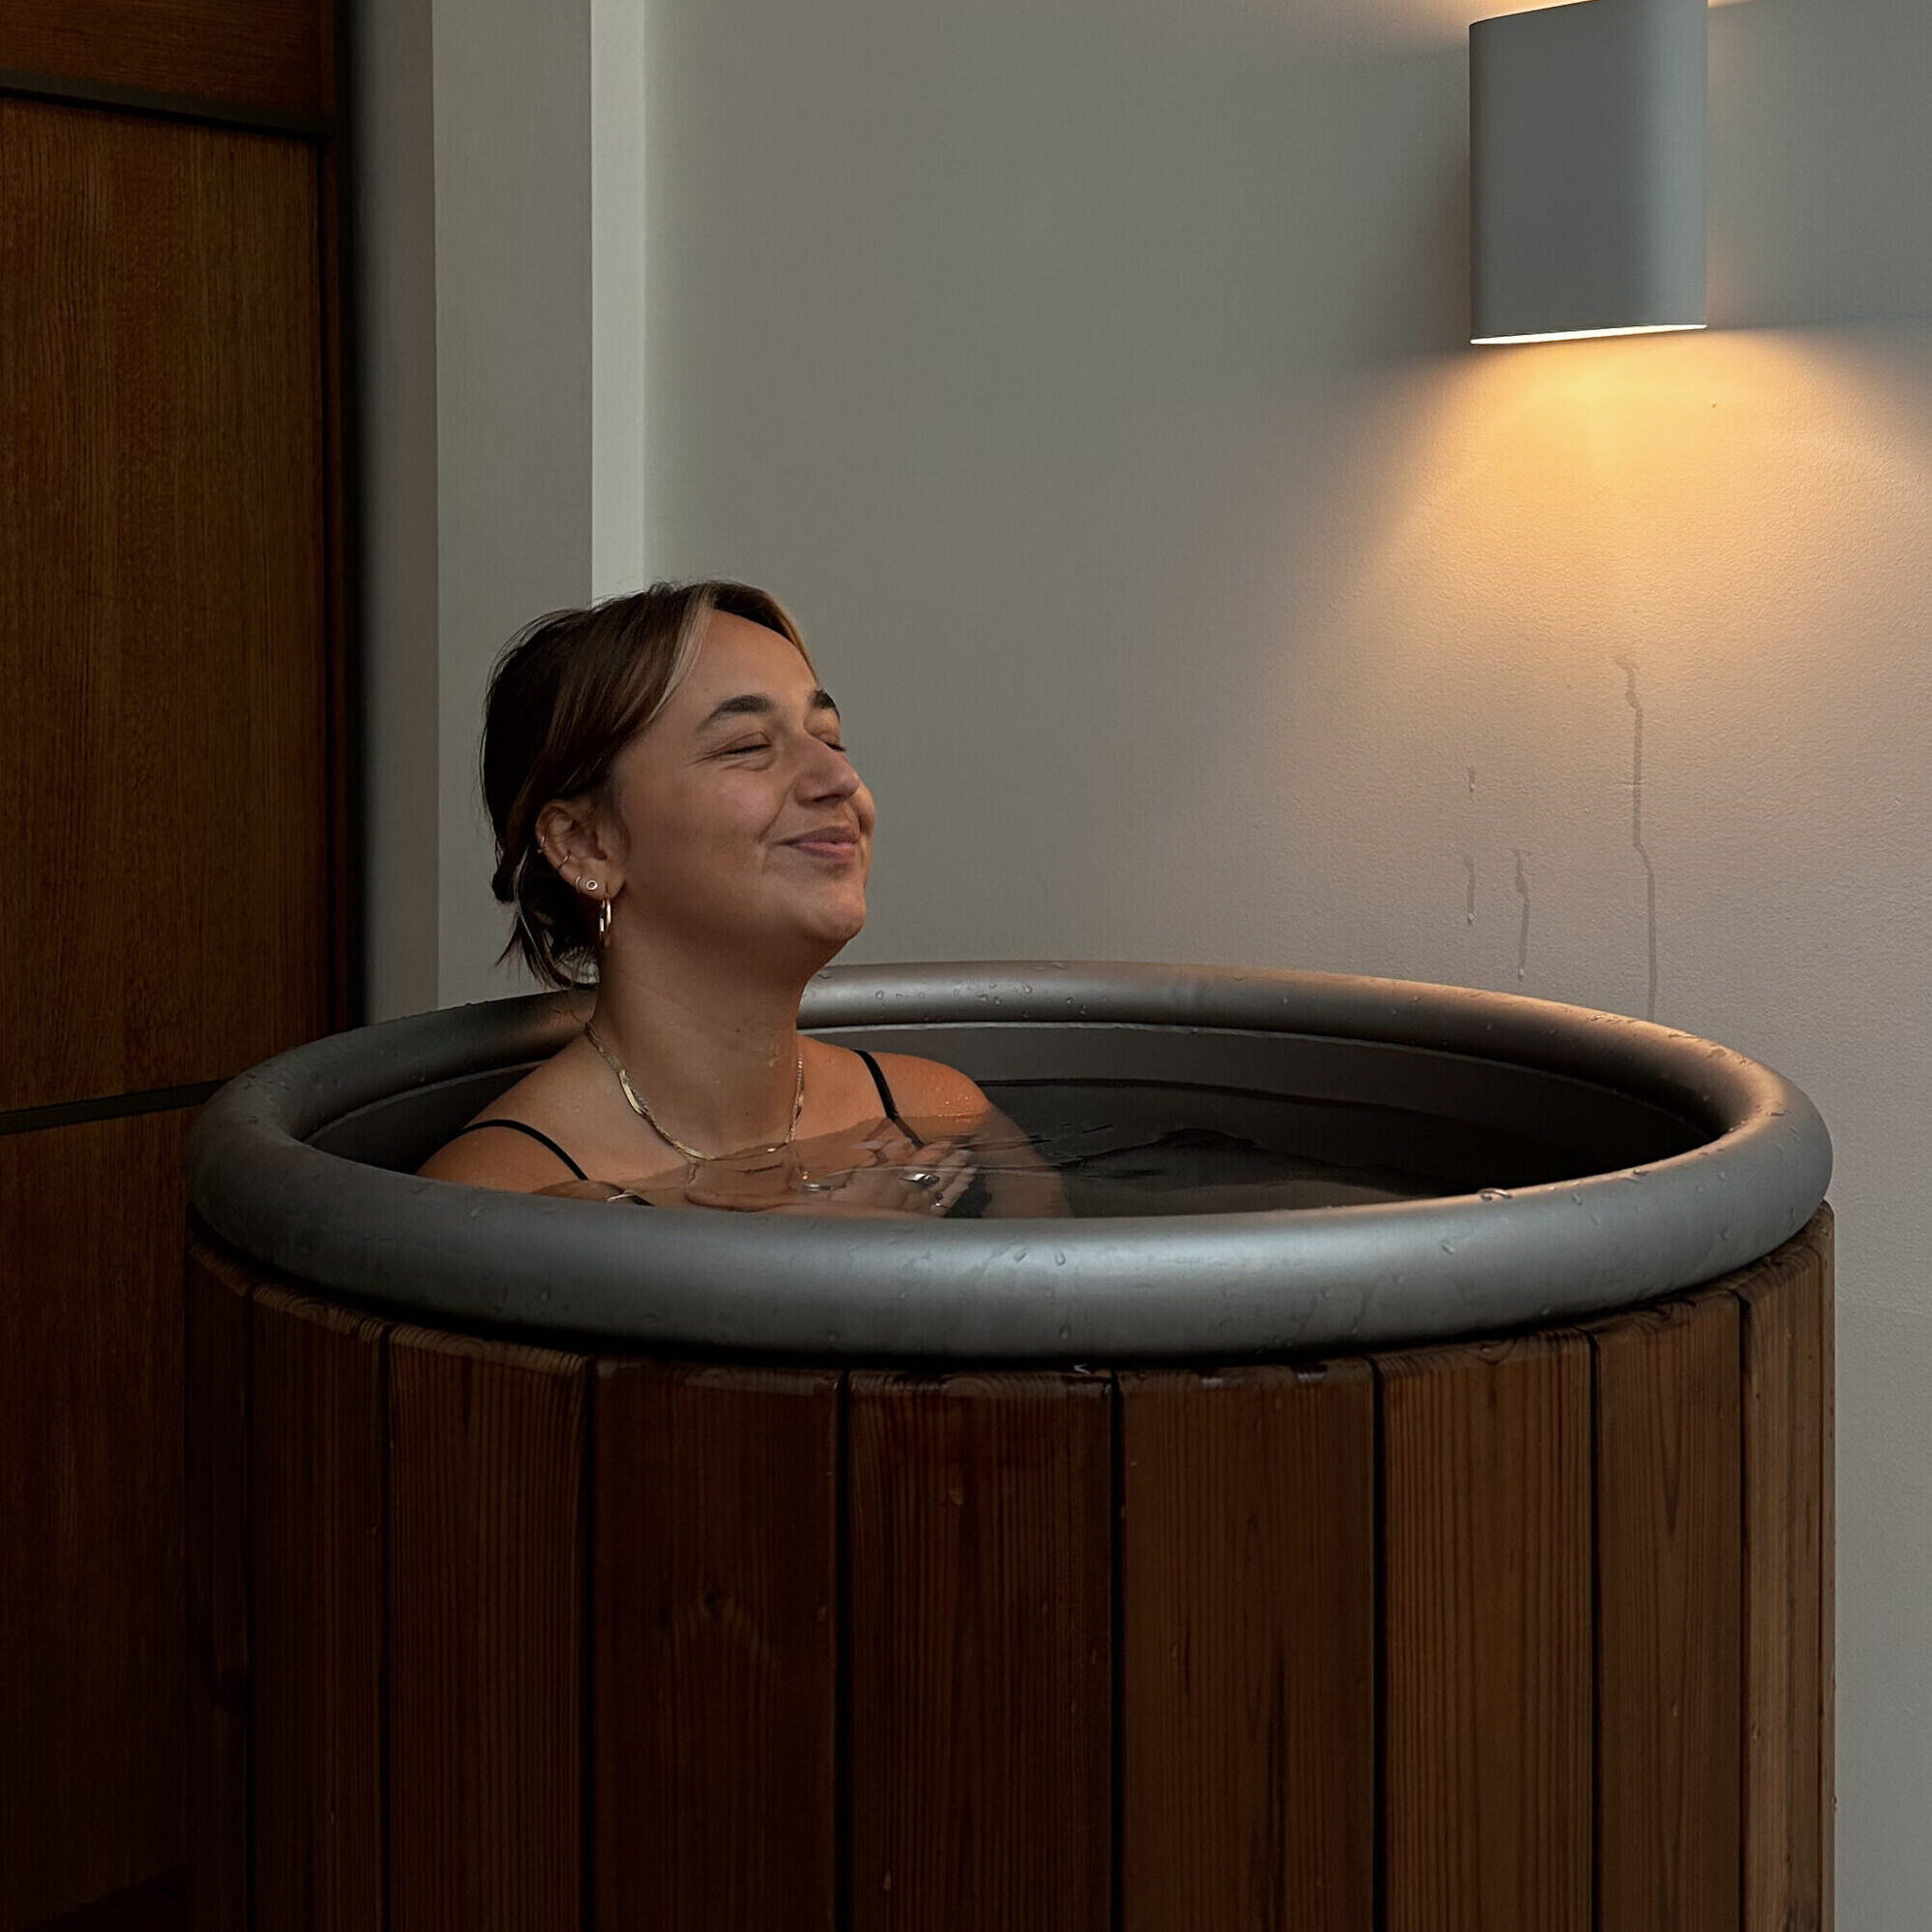 Zonne Perez Raya in the cold plunge barrel at Hima Icebaths Amsterdam